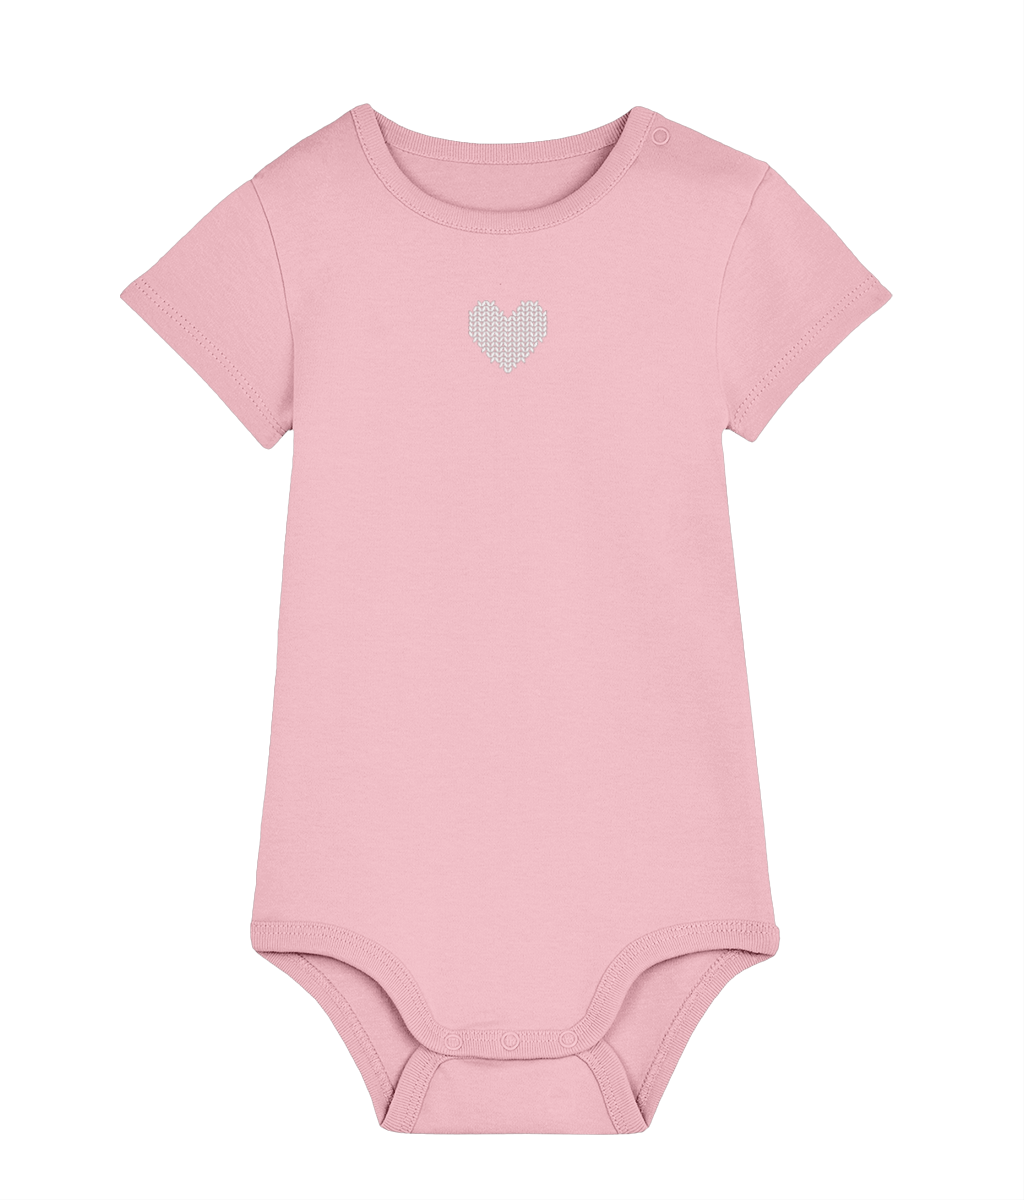 Made with Love Baby Bodysuit White Heart